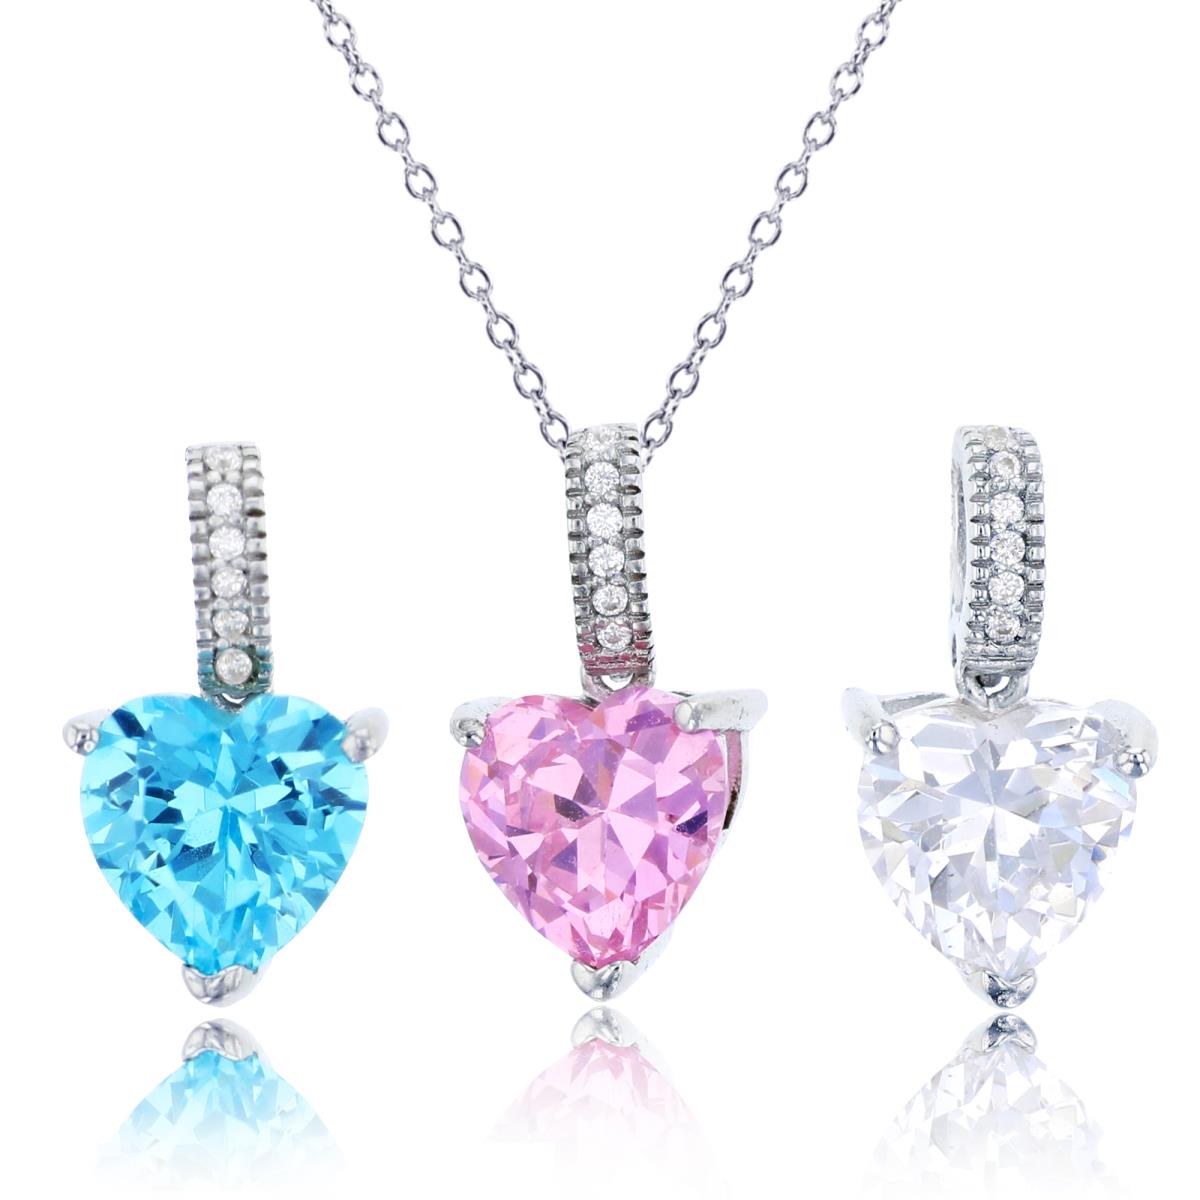 Sterling Silver Rhodium 8mm Heart Cut & Rd White, Pink & Blue CZ Set Of 3 Pendants & 18" Chain